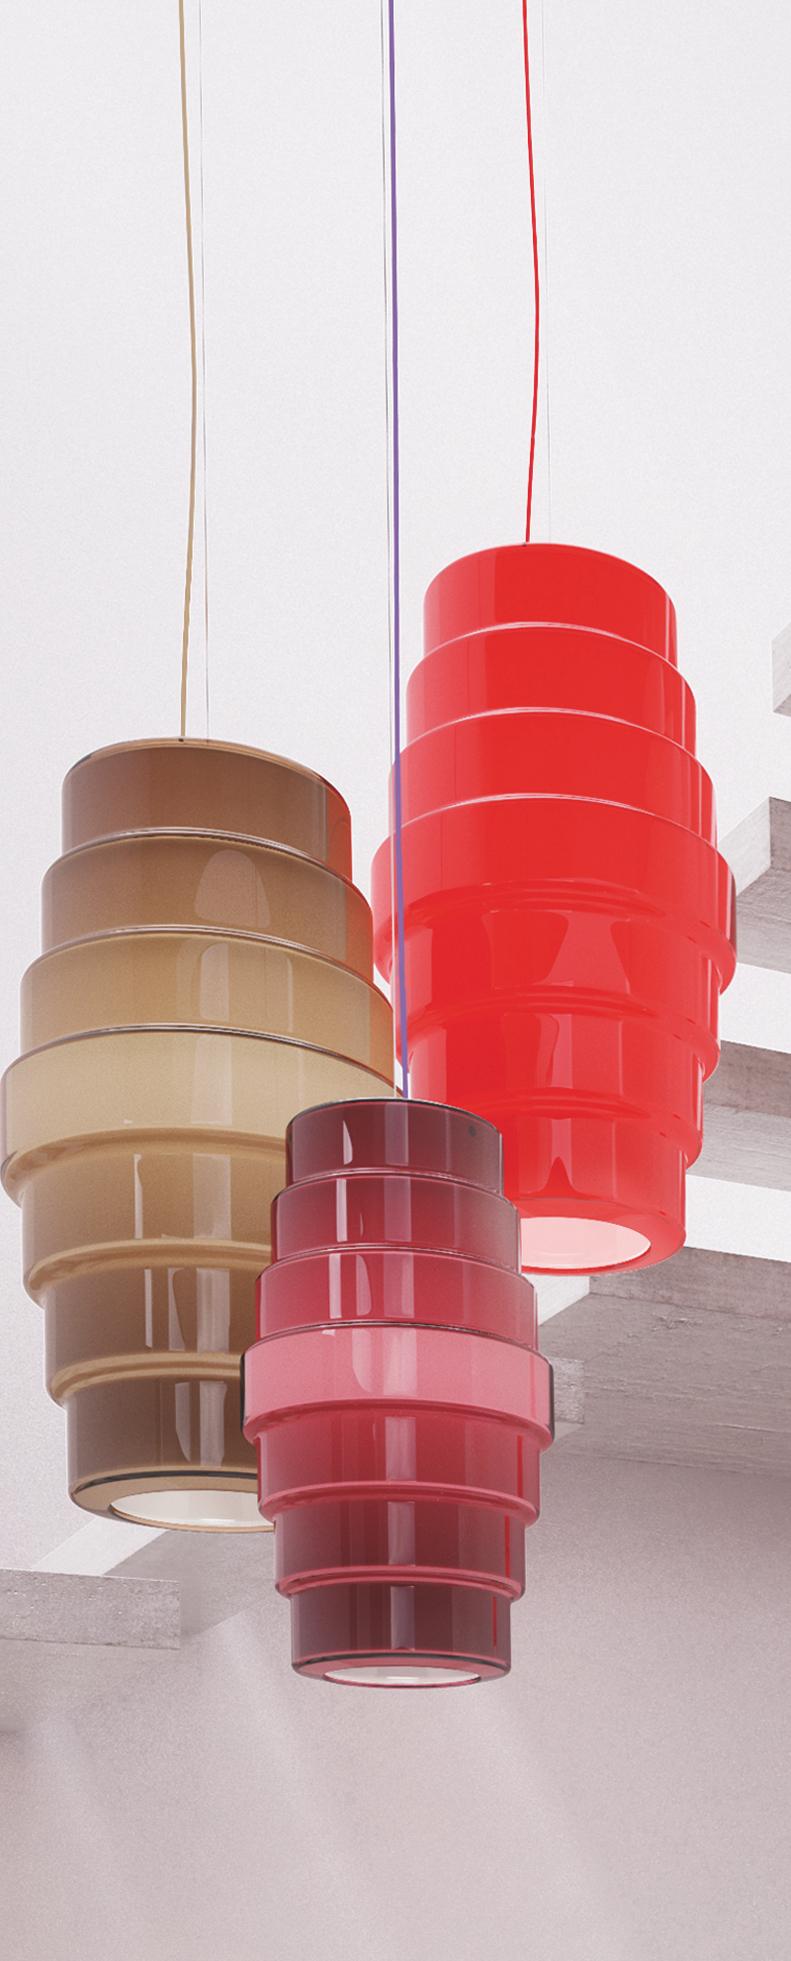 Zoe pendant light in violet shades of glass. Its shape is reminiscent of a lantern and brightens any living space with its bold red color. Also available in other colors, sizes and as a wall sconce or table light.

Light source: Halogen 1 max- 70